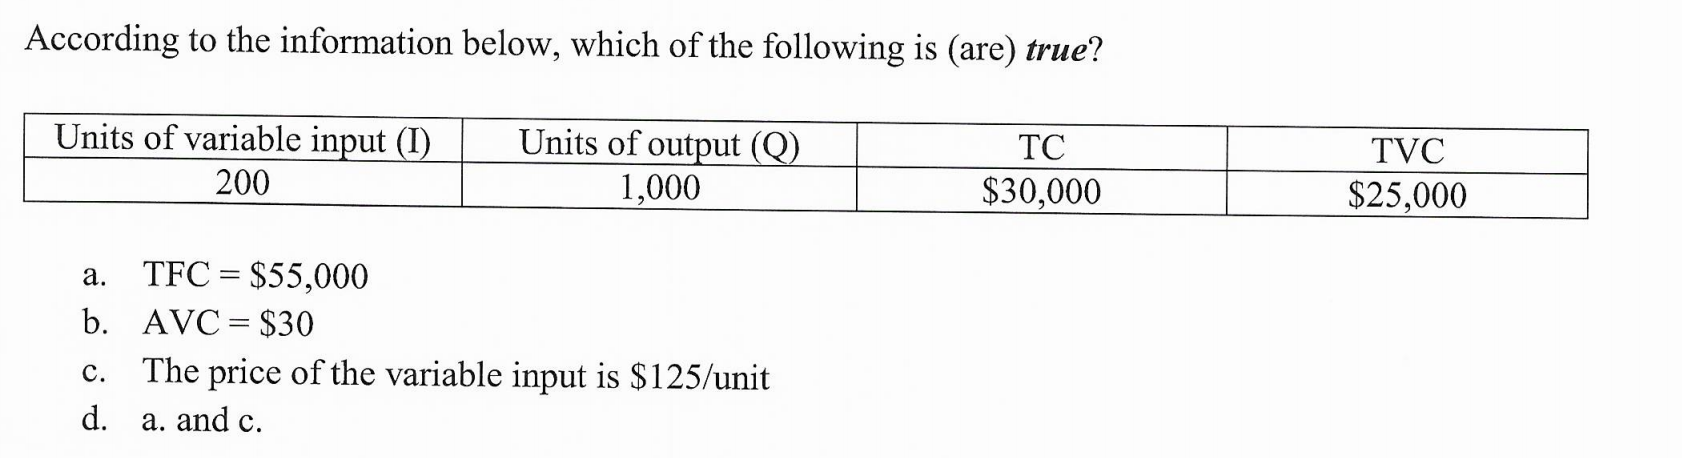 According to the information below, which of the following is (are) true?
Units of variable input (I)
Units of output (Q)
1,000
ТC
TVC
200
$30,000
$25,000
TFC $55,000
b. AVC $30
The price of the variable input is $125/unit
а.
с.
d.
a. and c
